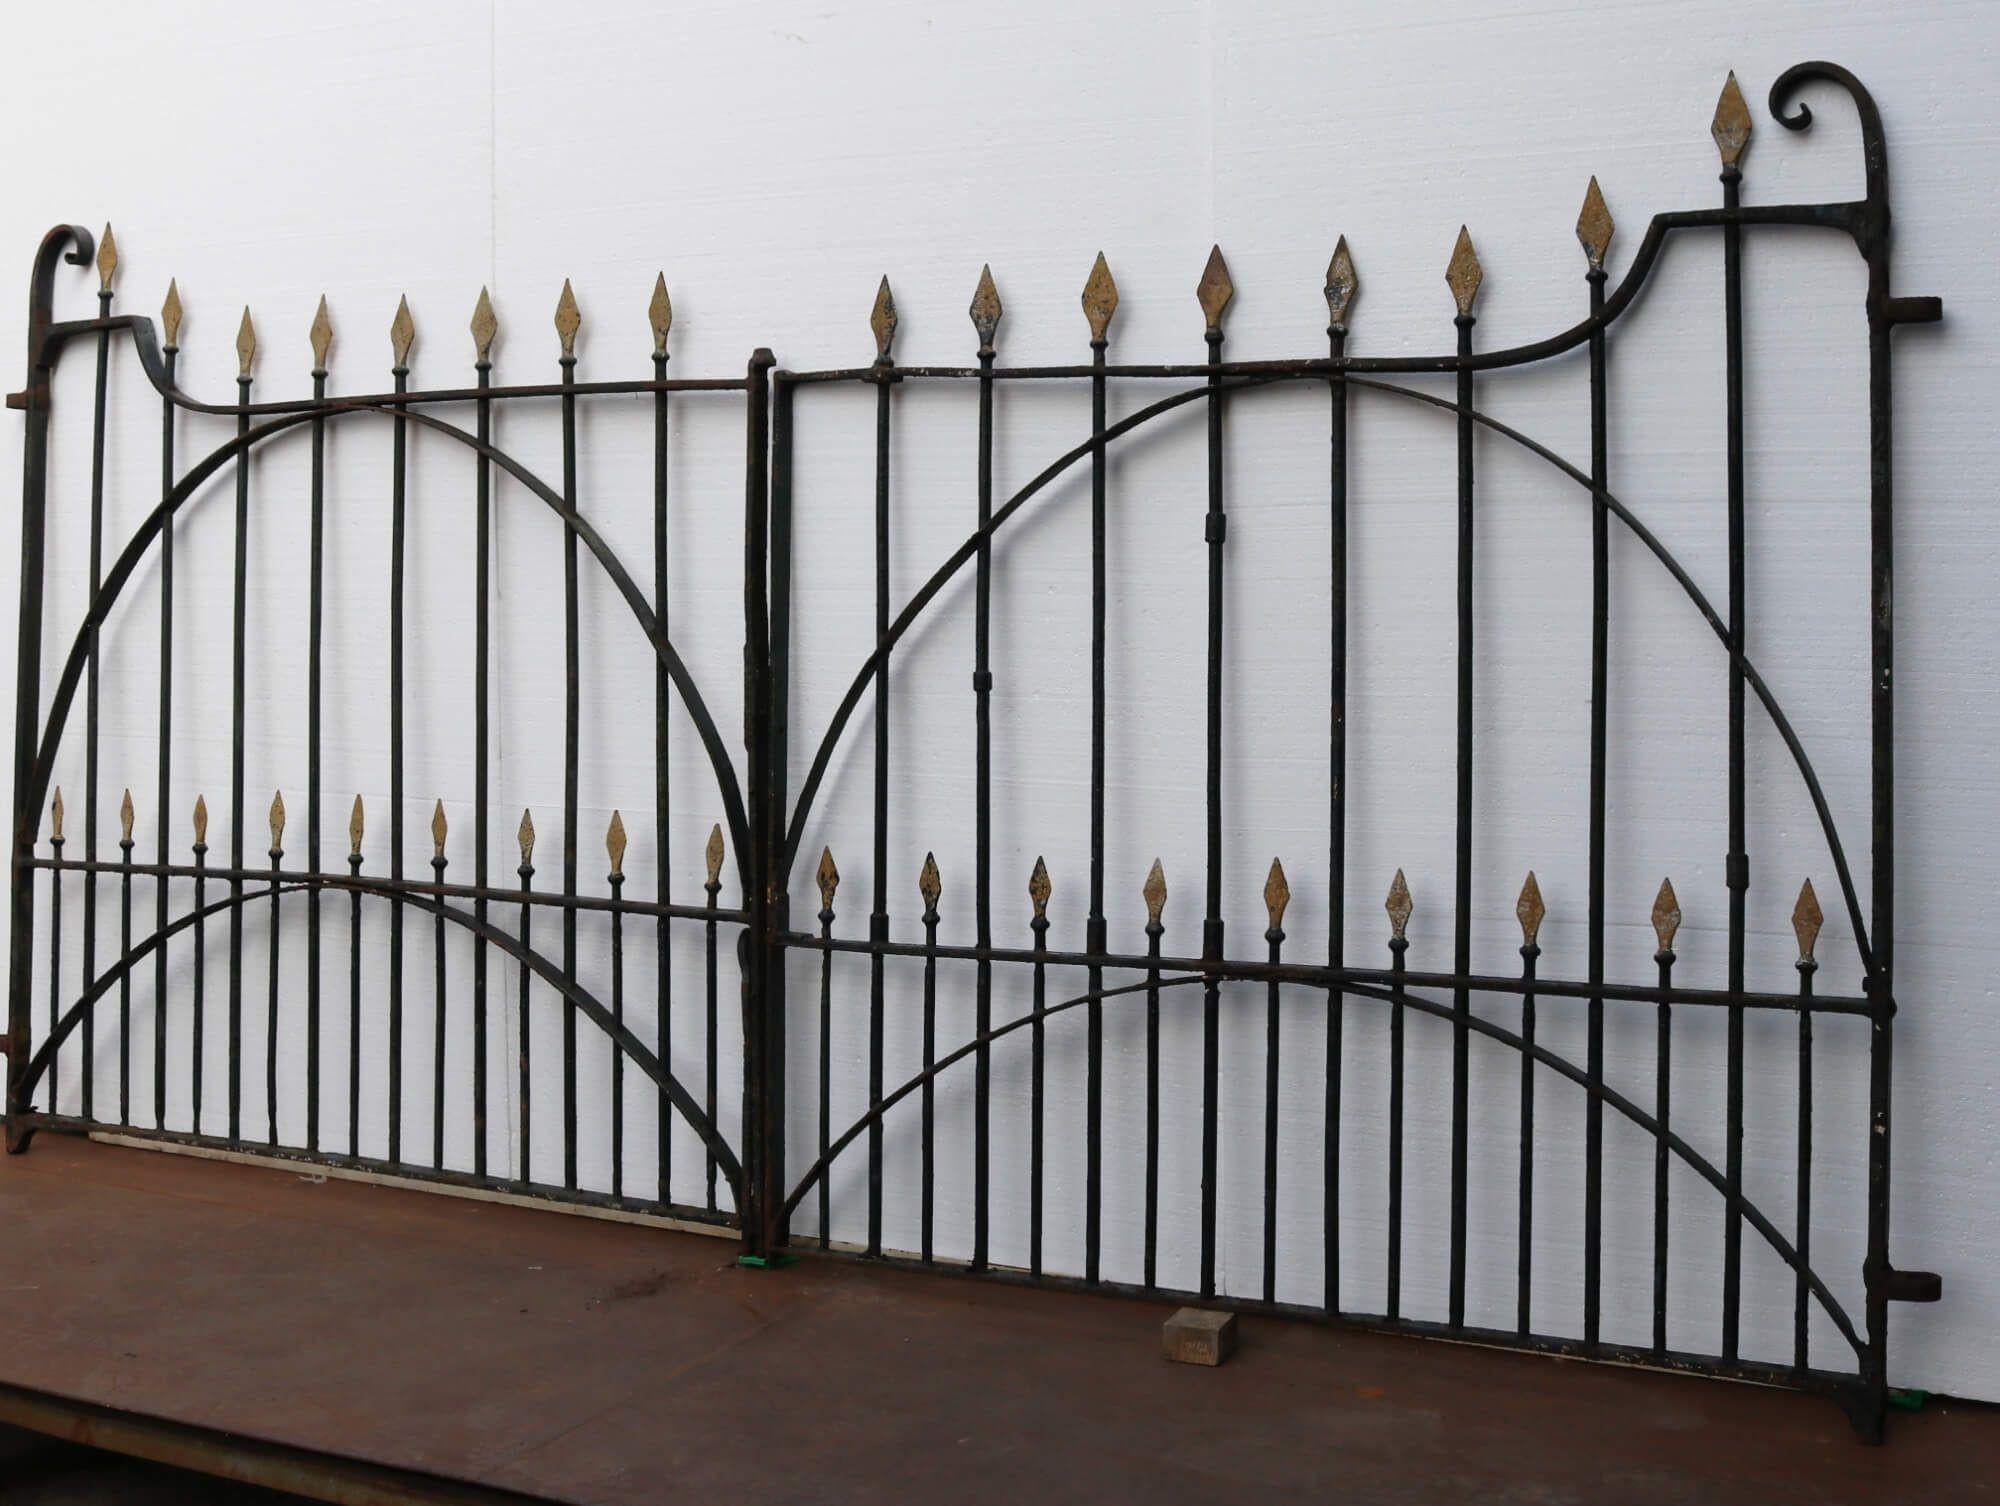 Set of Georgian Wrought Iron Driveway Gates 312.5 cm (10’2”) In Fair Condition For Sale In Wormelow, Herefordshire